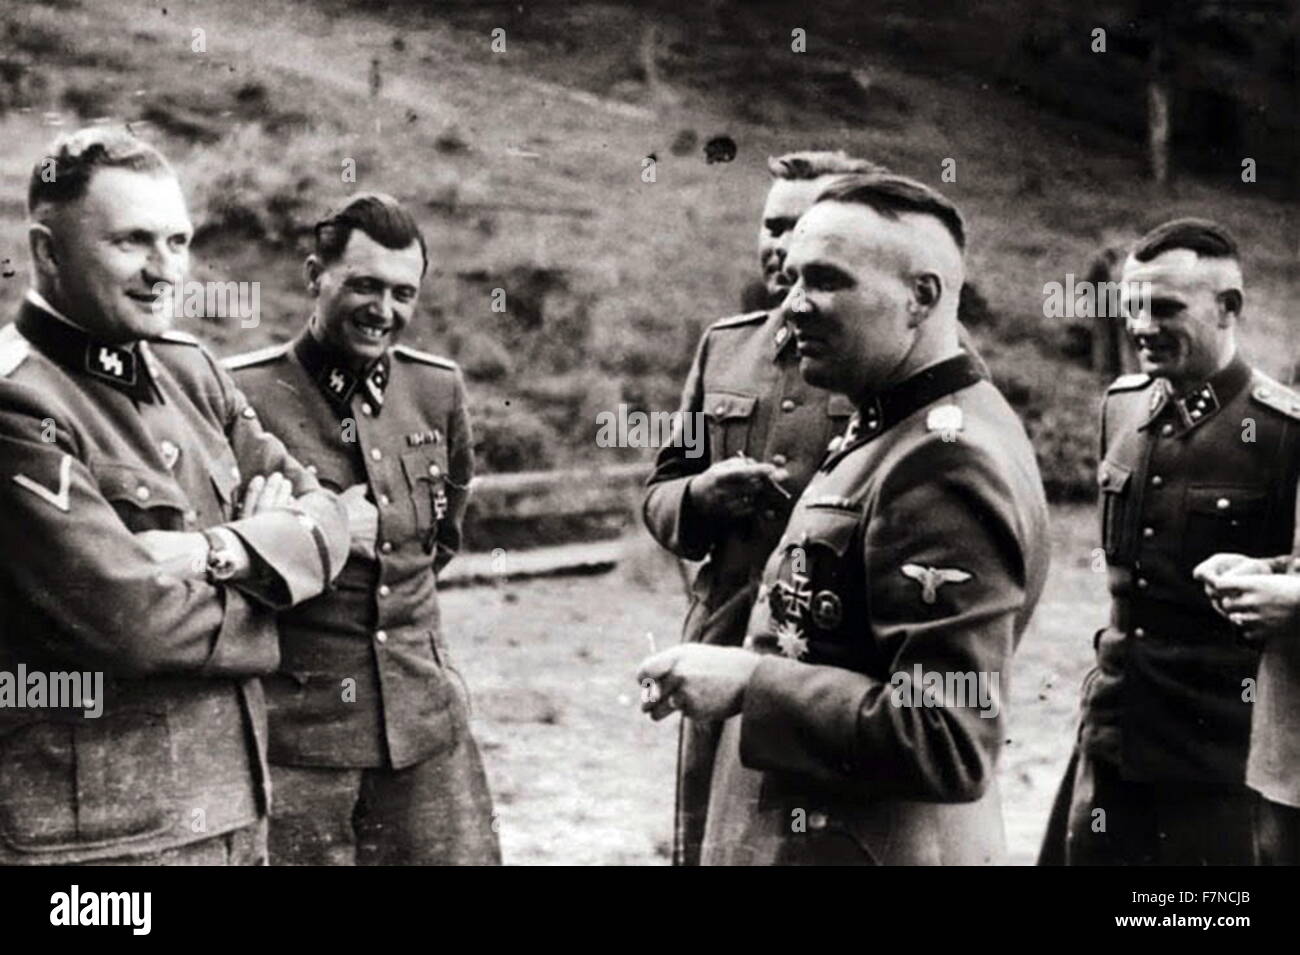 group of SS officers in Auschwitz: From left, Karl Hoecker, Dr. Josef Mengele, Karl-Friedrich Hoecker (11 December 1911 – 30 January 2000) was a SS-Obersturmführer (First Lieutenant) and the adjutant to Richard Baer, who was a commandant of Auschwitz concentration camp from May 1944 to December 1944 Stock Photo